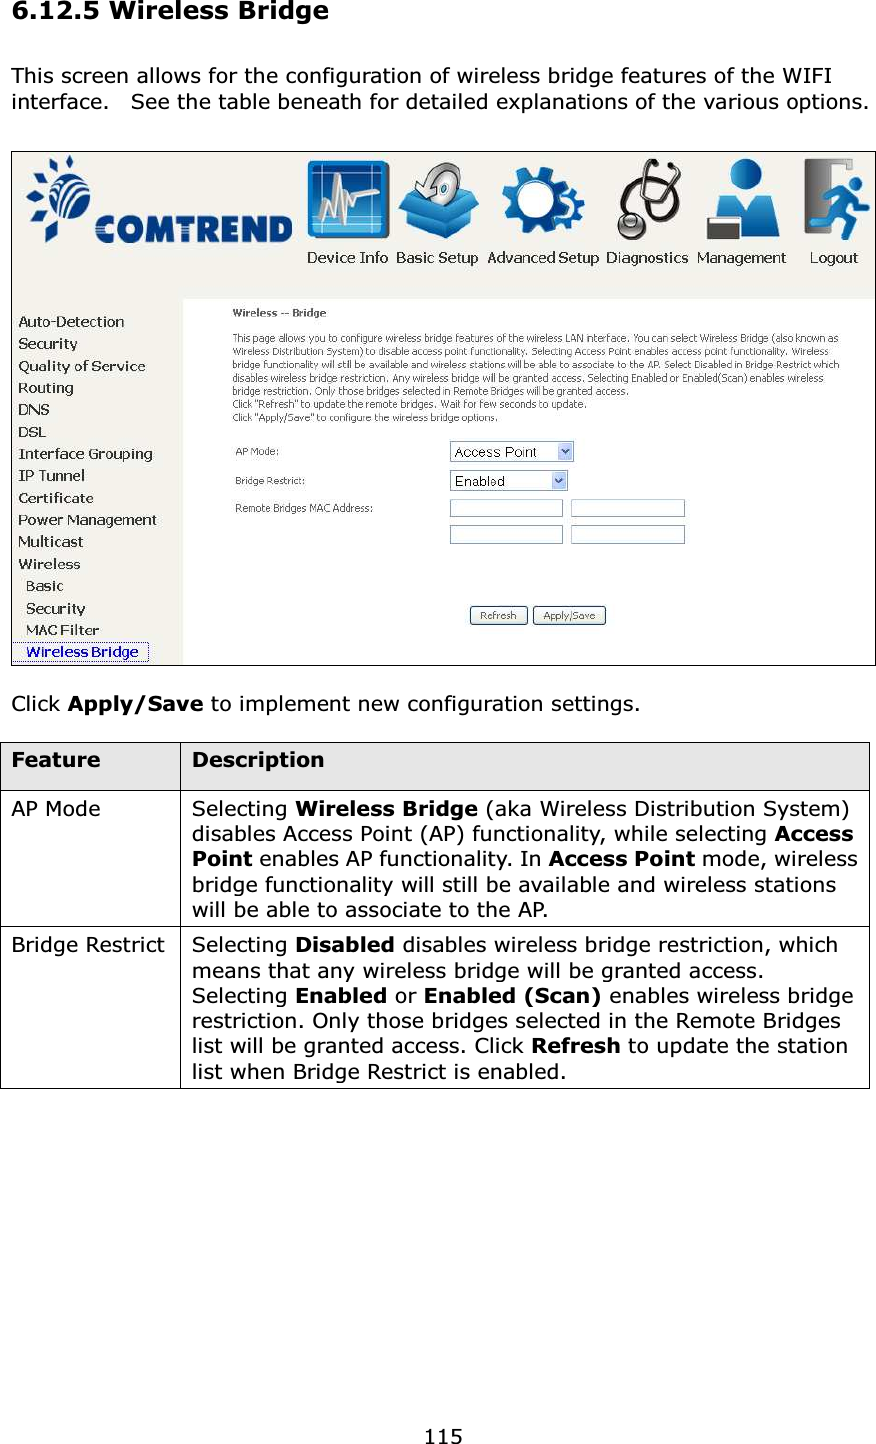  1156.12.5 Wireless Bridge This screen allows for the configuration of wireless bridge features of the WIFI interface.    See the table beneath for detailed explanations of the various options.    Click Apply/Save to implement new configuration settings.    Feature  Description AP Mode  Selecting Wireless Bridge (aka Wireless Distribution System) disables Access Point (AP) functionality, while selecting Access Point enables AP functionality. In Access Point mode, wireless bridge functionality will still be available and wireless stations will be able to associate to the AP.     Bridge Restrict Selecting Disabled disables wireless bridge restriction, which means that any wireless bridge will be granted access.   Selecting Enabled or Enabled (Scan) enables wireless bridge restriction. Only those bridges selected in the Remote Bridges list will be granted access. Click Refresh to update the station list when Bridge Restrict is enabled.  